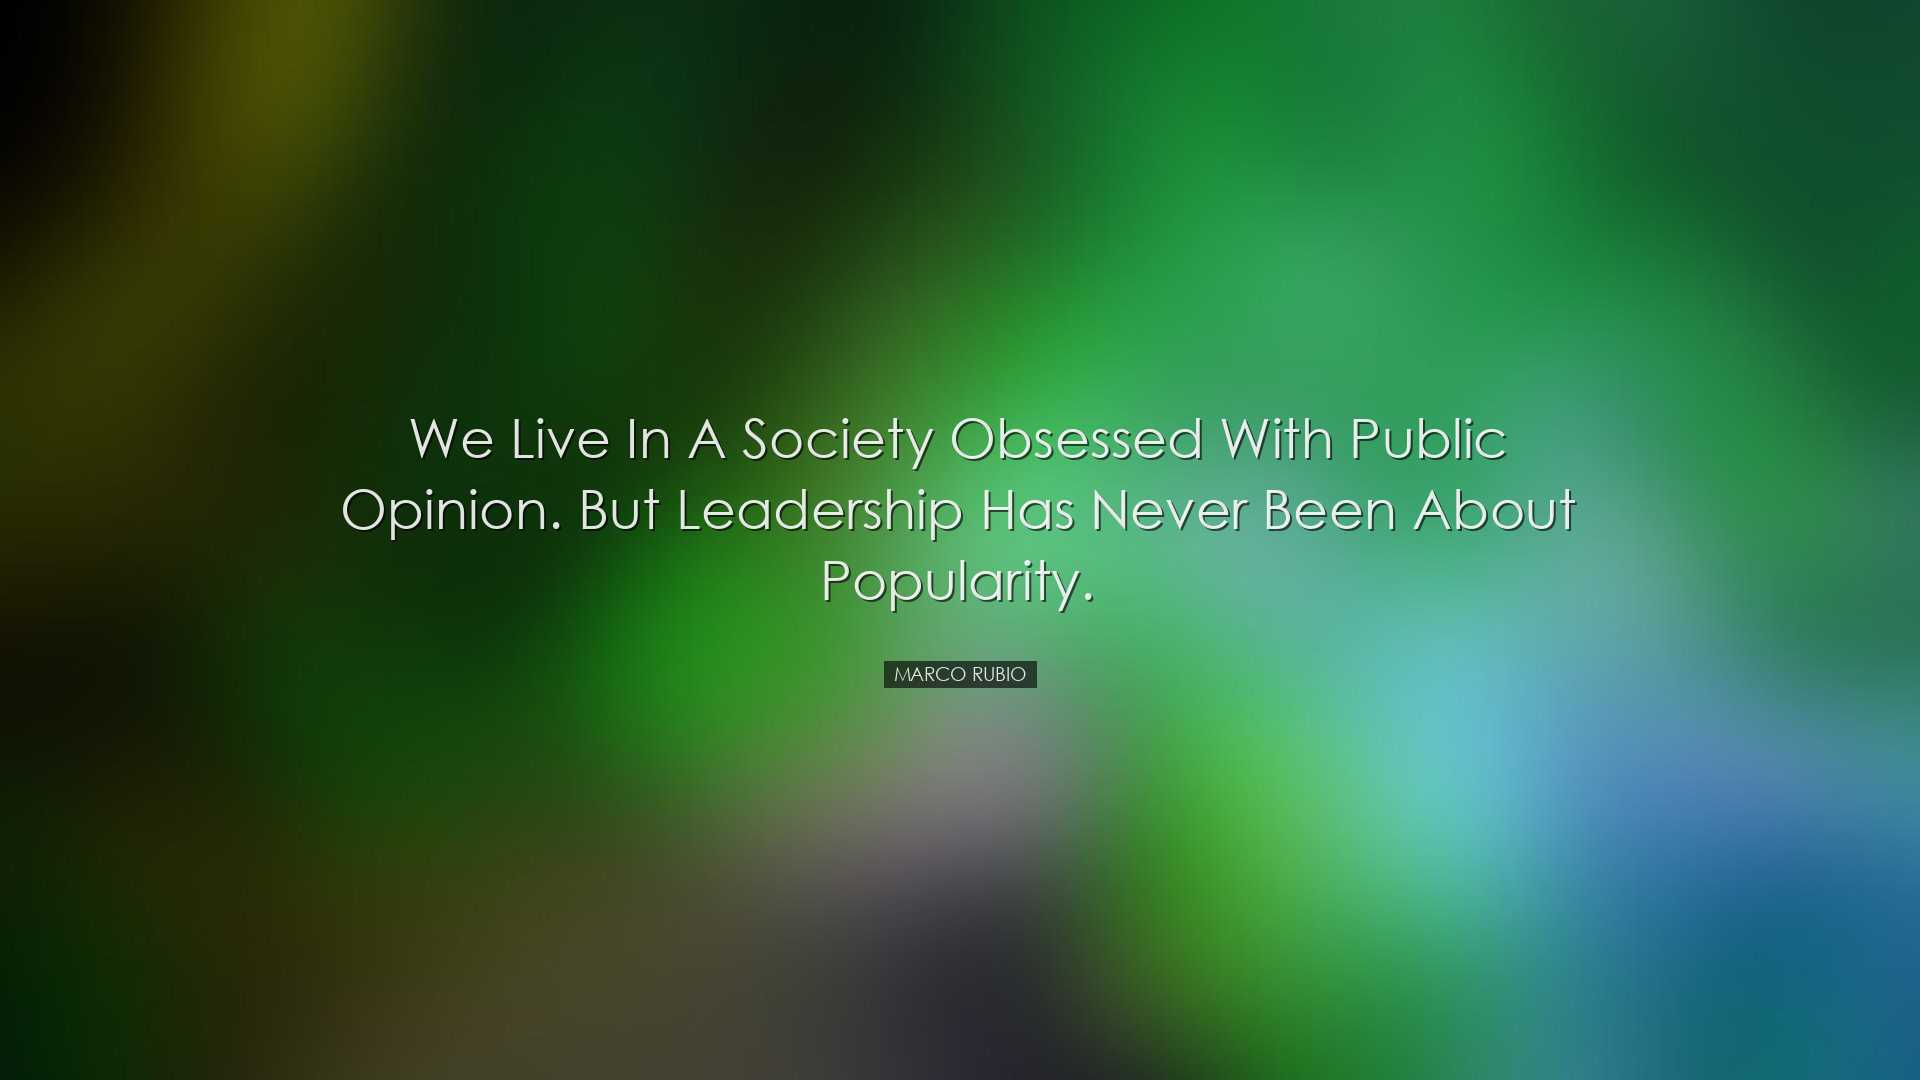 We live in a society obsessed with public opinion. But leadership